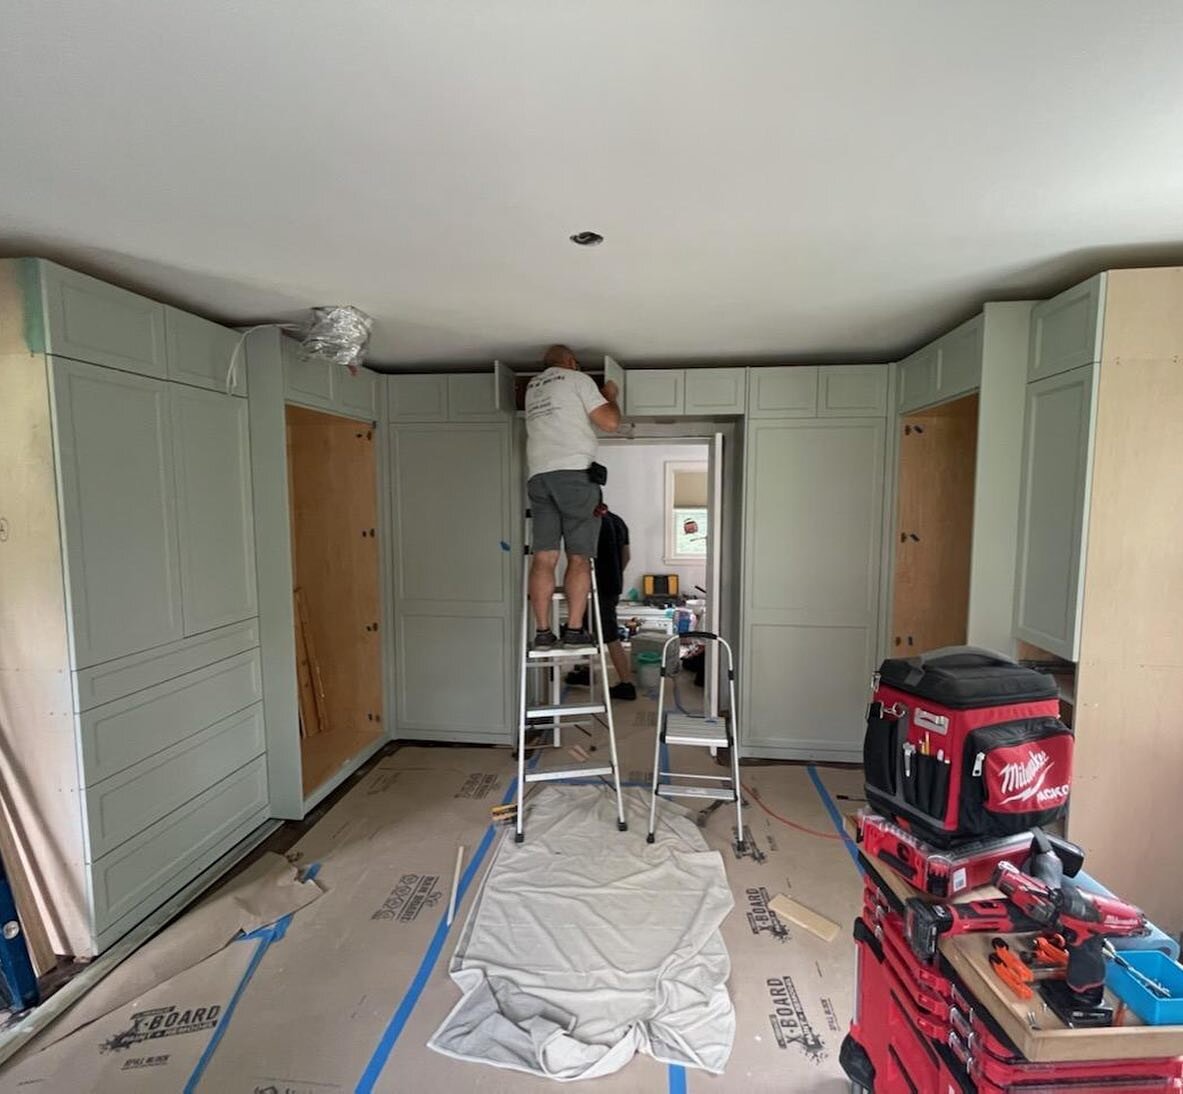 It&rsquo;s coming together so quickly now! Our closets were installed yesterday for this #MasterSuite project. 
.
Can&rsquo;t wait to share the finished result!
.
.
.
.
.
.
.
.
.
.
.
.
.
.
.
.
.
.
.

@uptownmontclairnj 
#montclairnj #essexcounty #ess